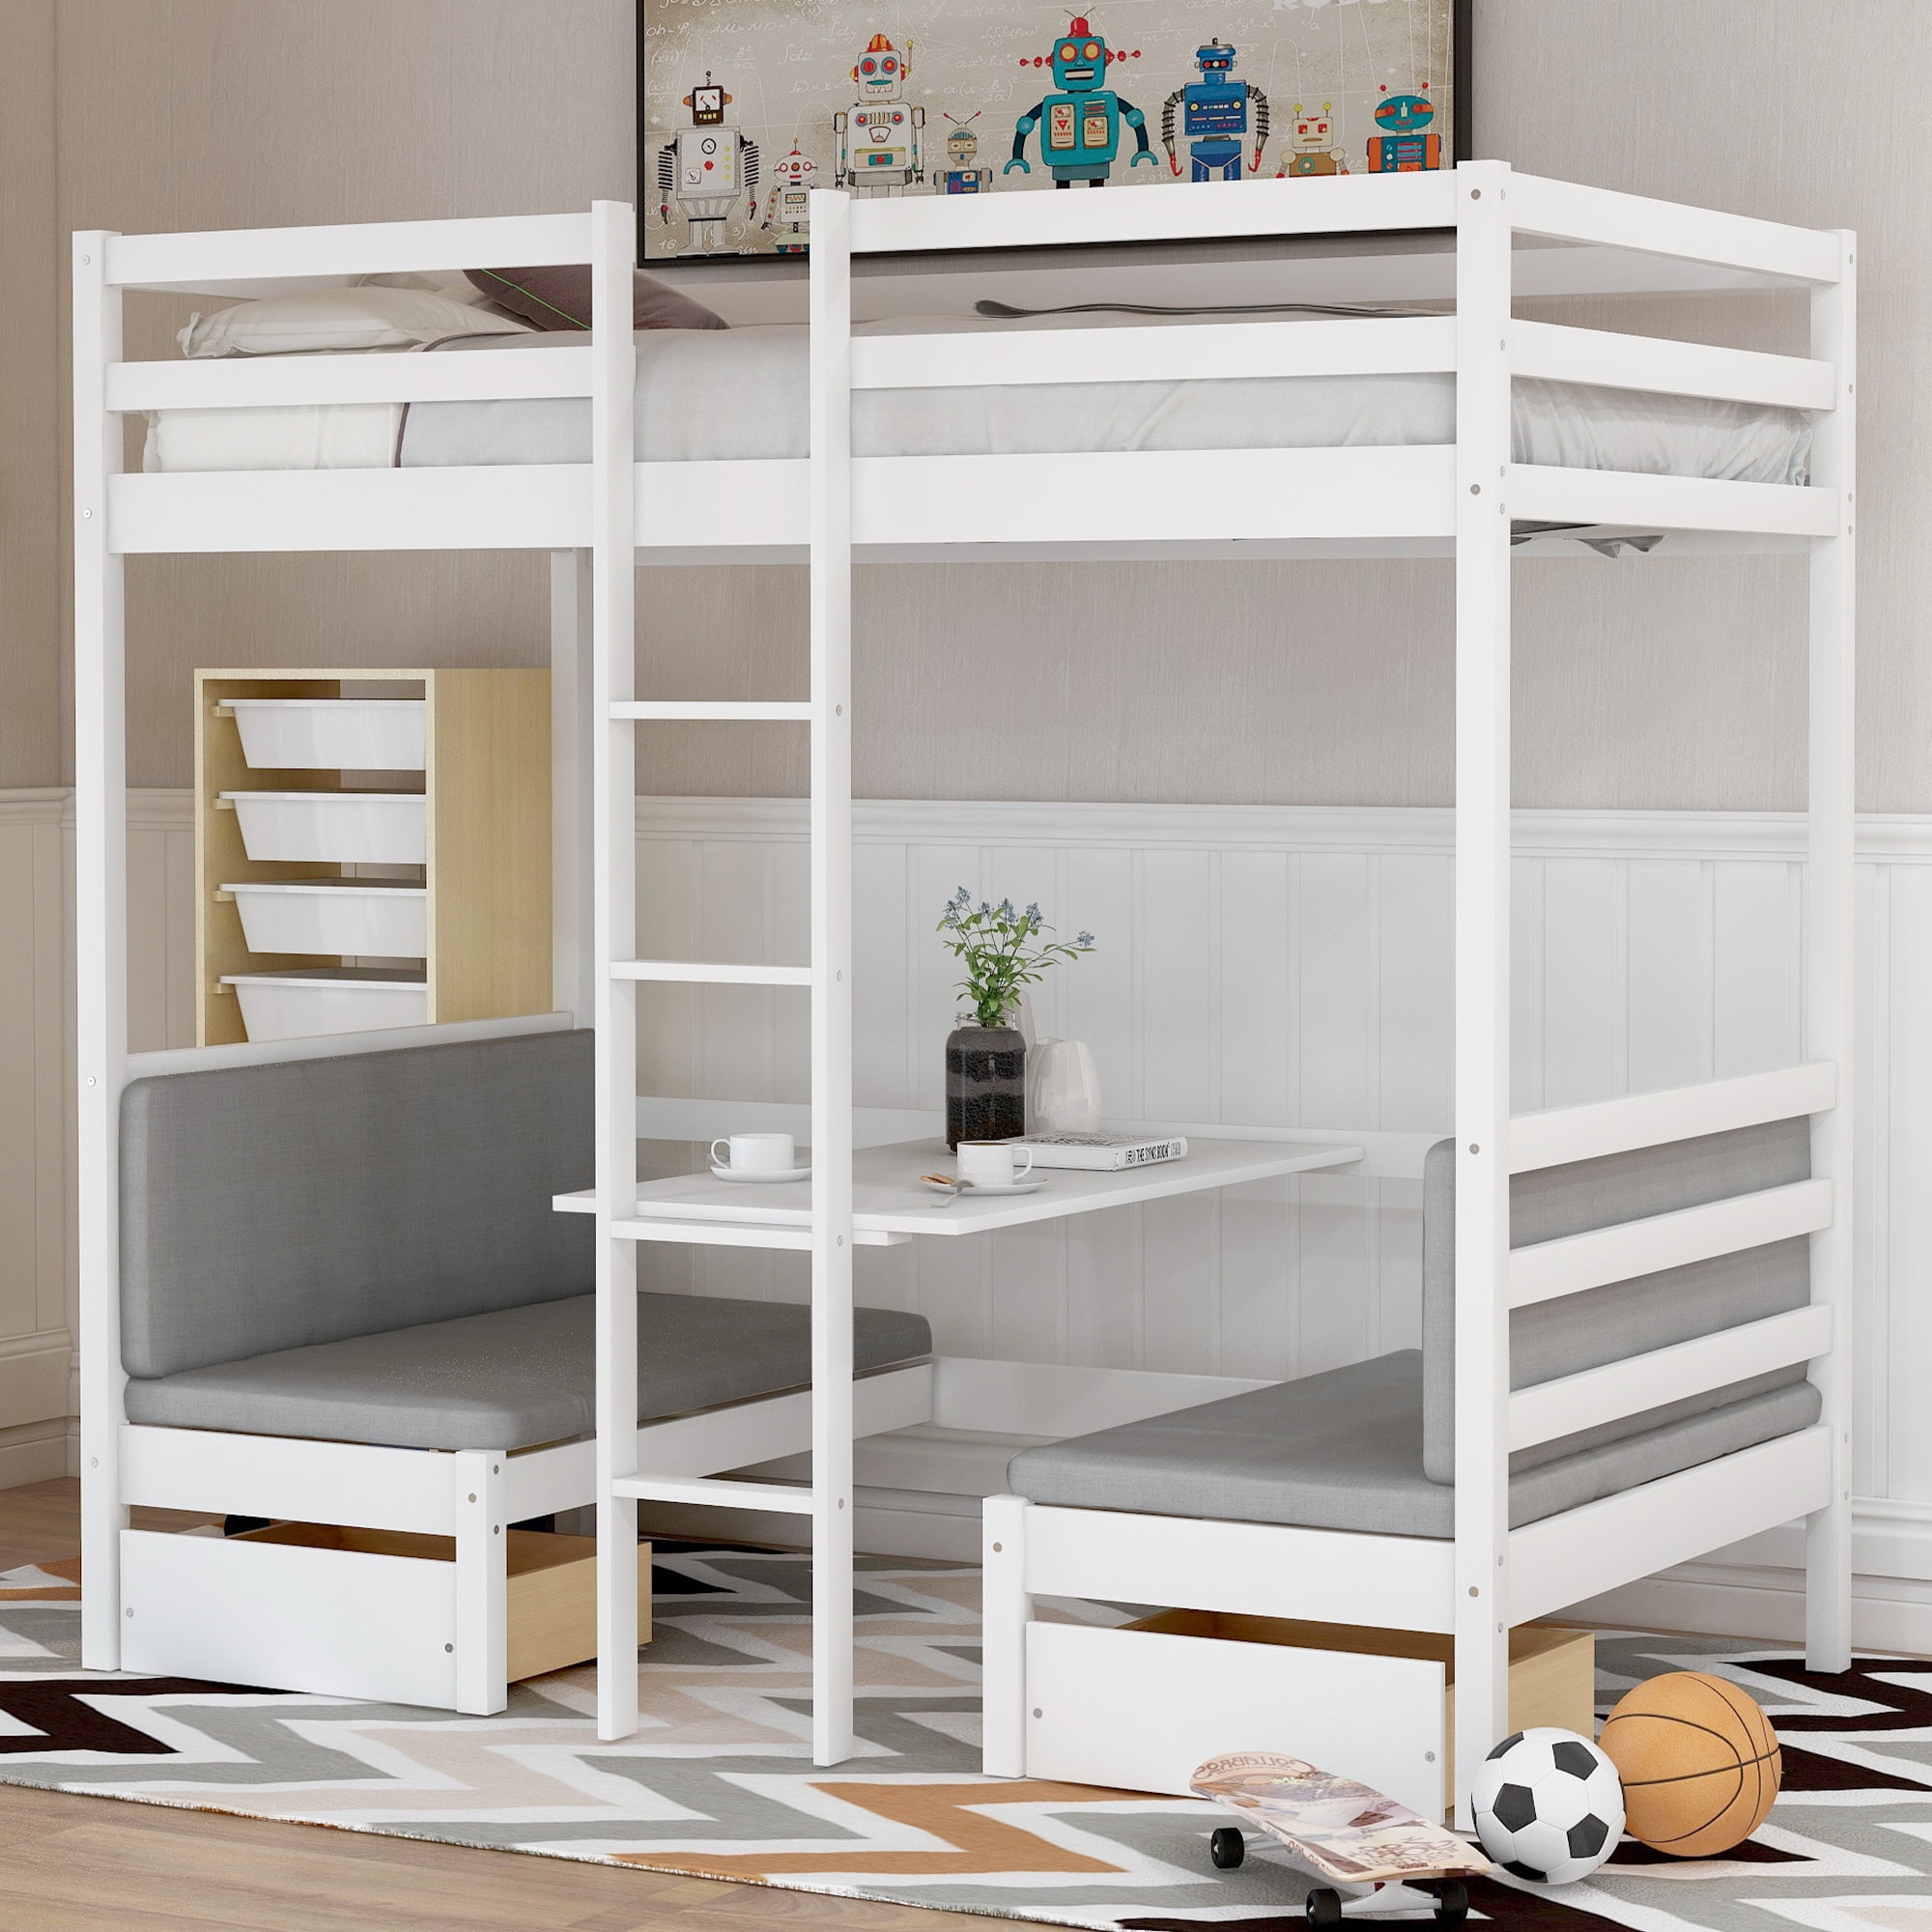 Euroco Solid Wood Convertible Twin Bunk, Twin Beds That Can Convert To Bunk